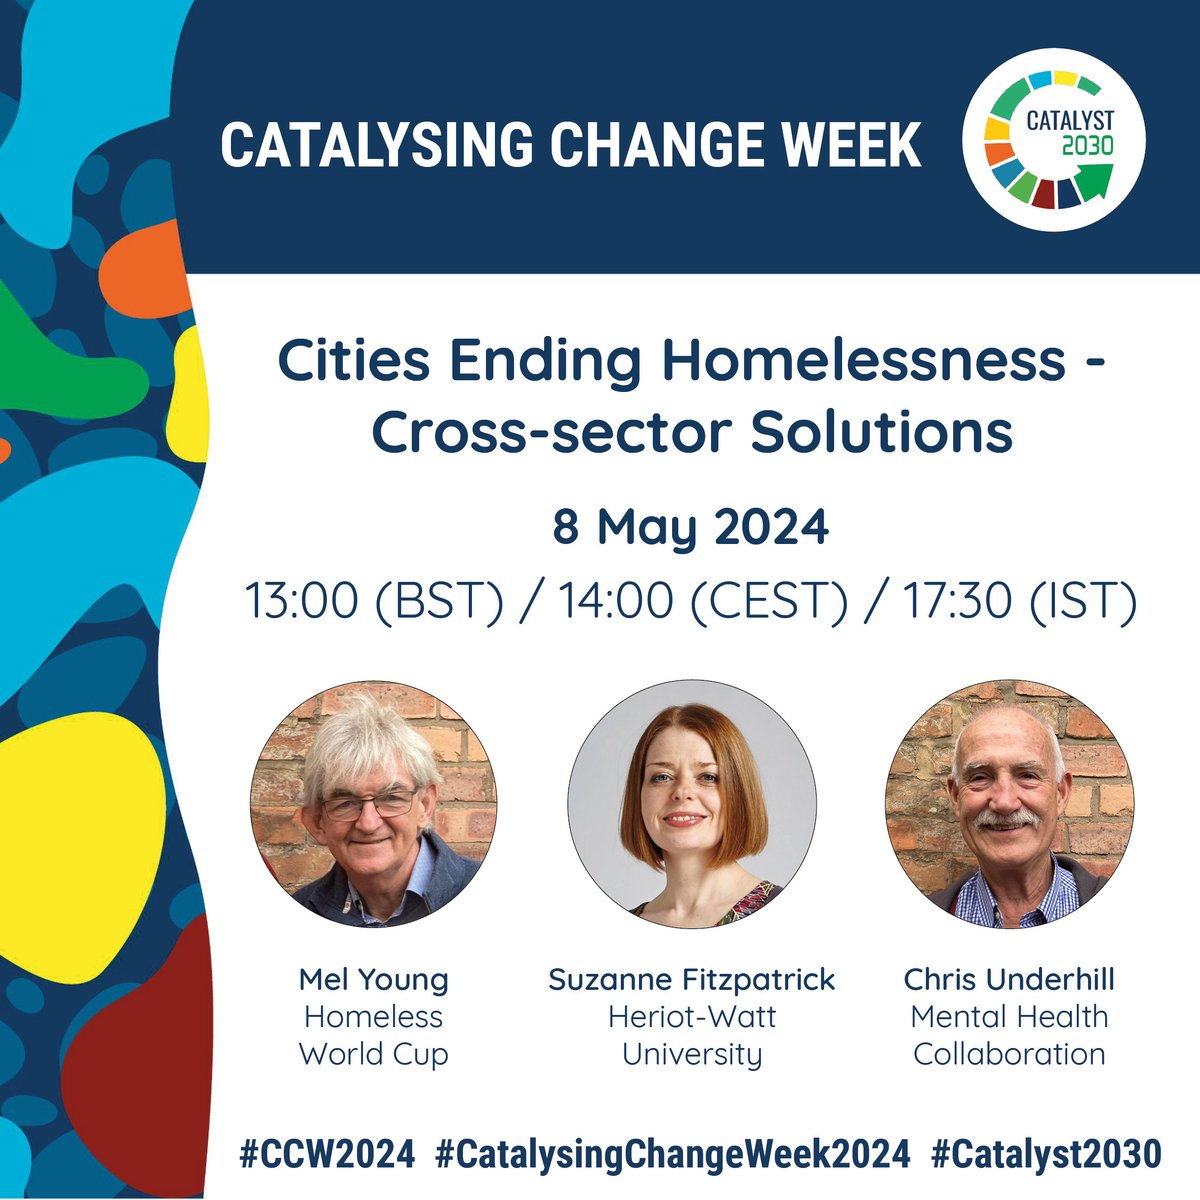 Join our co-founder @MelYoung53, Suzanne Fitzpatrick & Chris Underhill as they explore & invite cross-sector solutions to #homelessness in our Cities Ending Homelessness webinar next week! Register free: catalyst2030.net/events/cities-… #CCW2024 @ISPHERE_HWU @Catalyst_2030